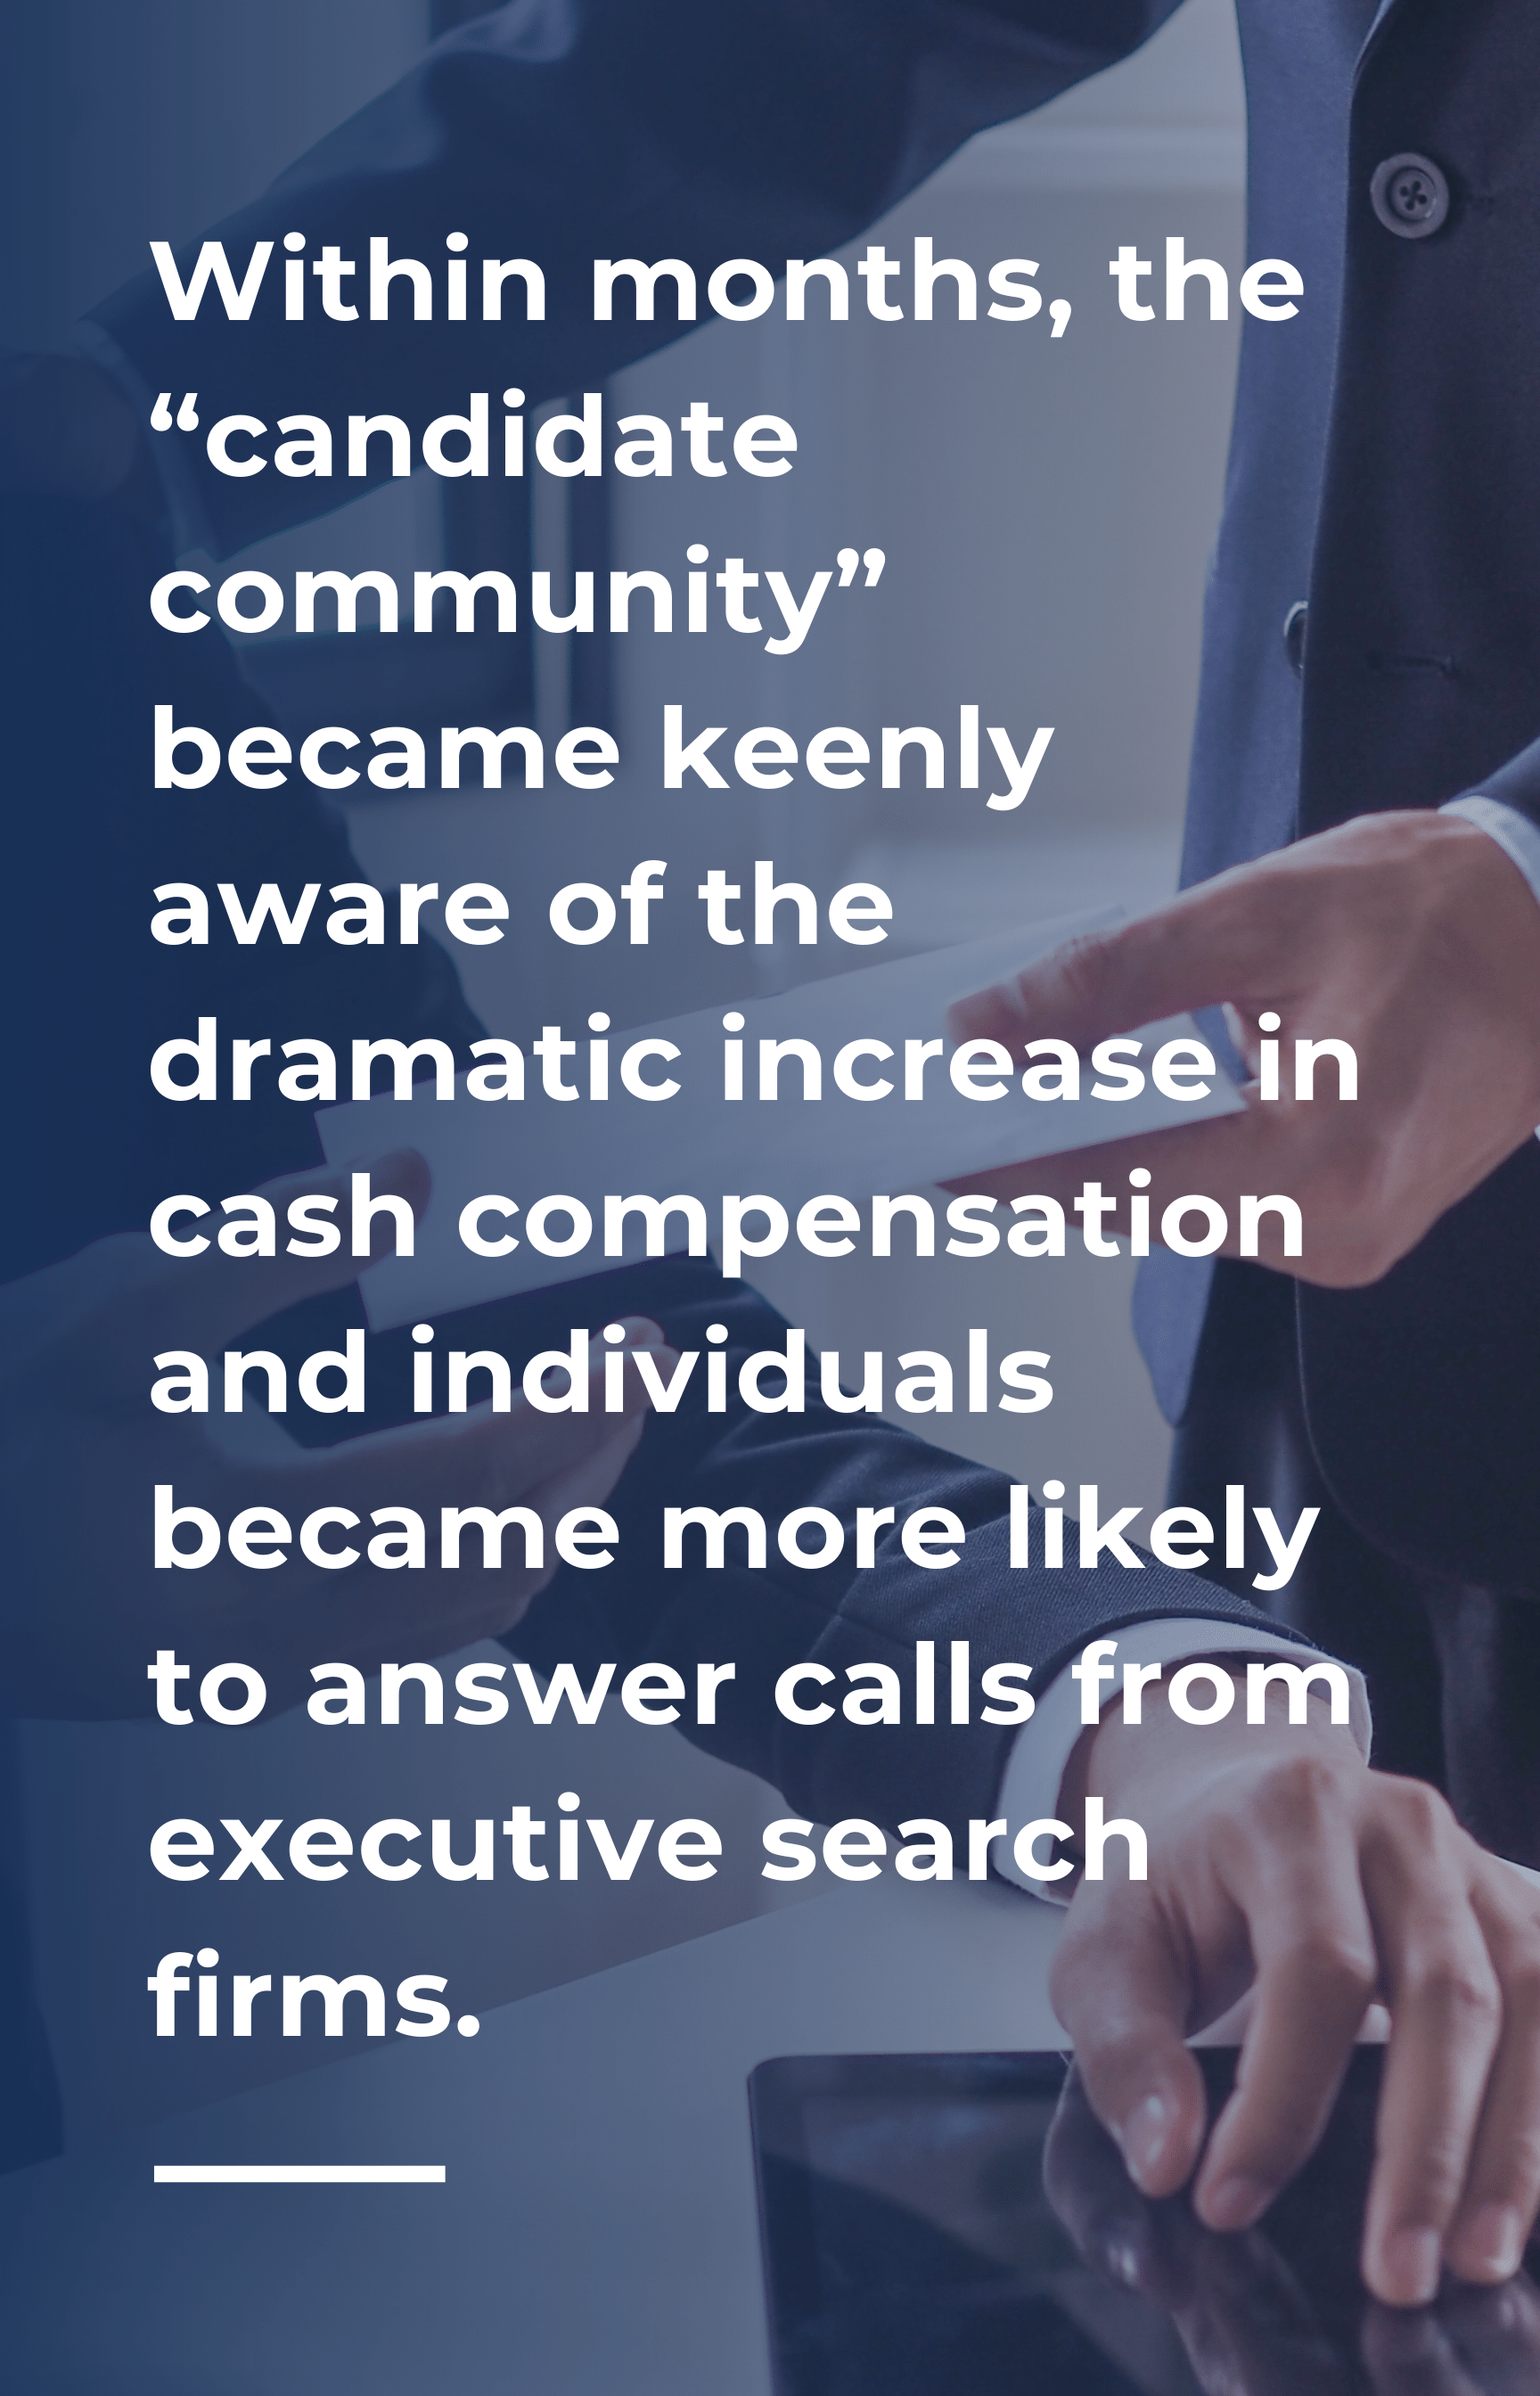 Within months, the “candidate community” became keenly aware of the dramatic increase in cash compensation and individuals became more likely to answer calls from executive search firms.